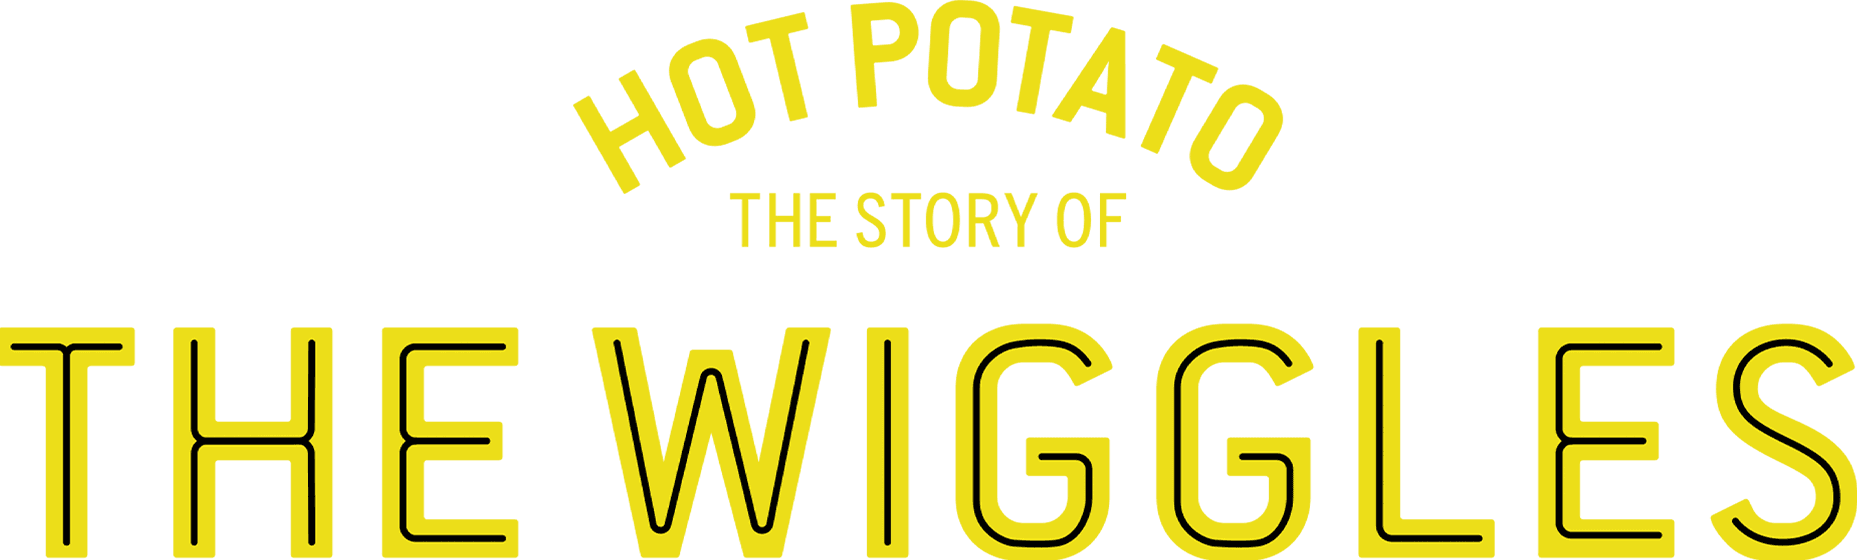 Hot Potato: The Story of The Wiggles logo